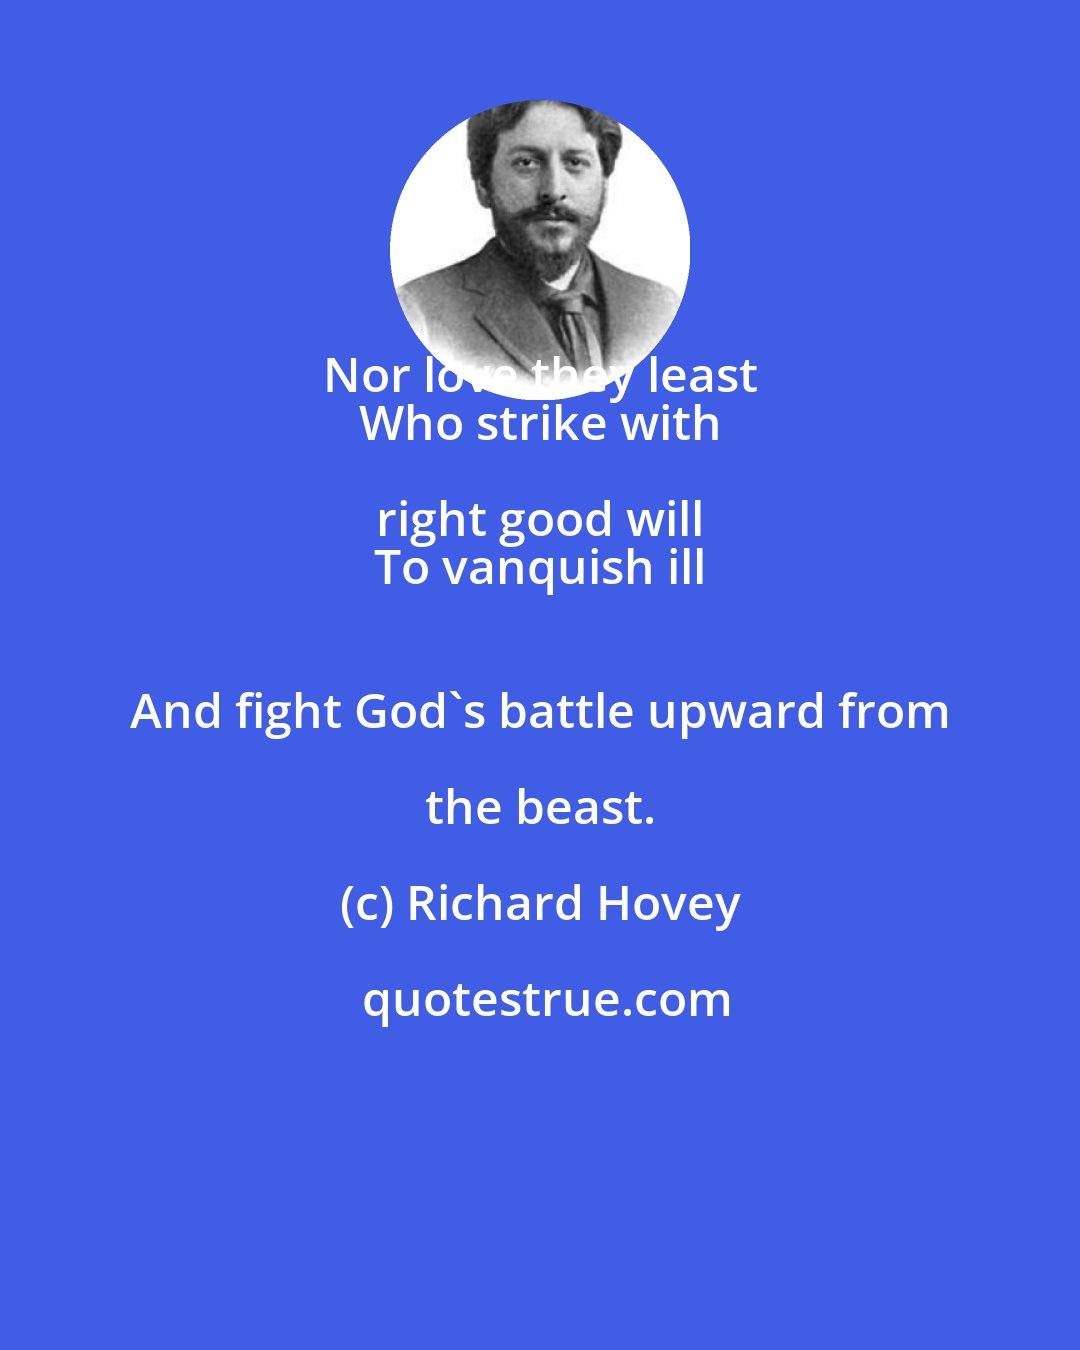 Richard Hovey: Nor love they least 
 Who strike with right good will 
 To vanquish ill 
 And fight God's battle upward from the beast.